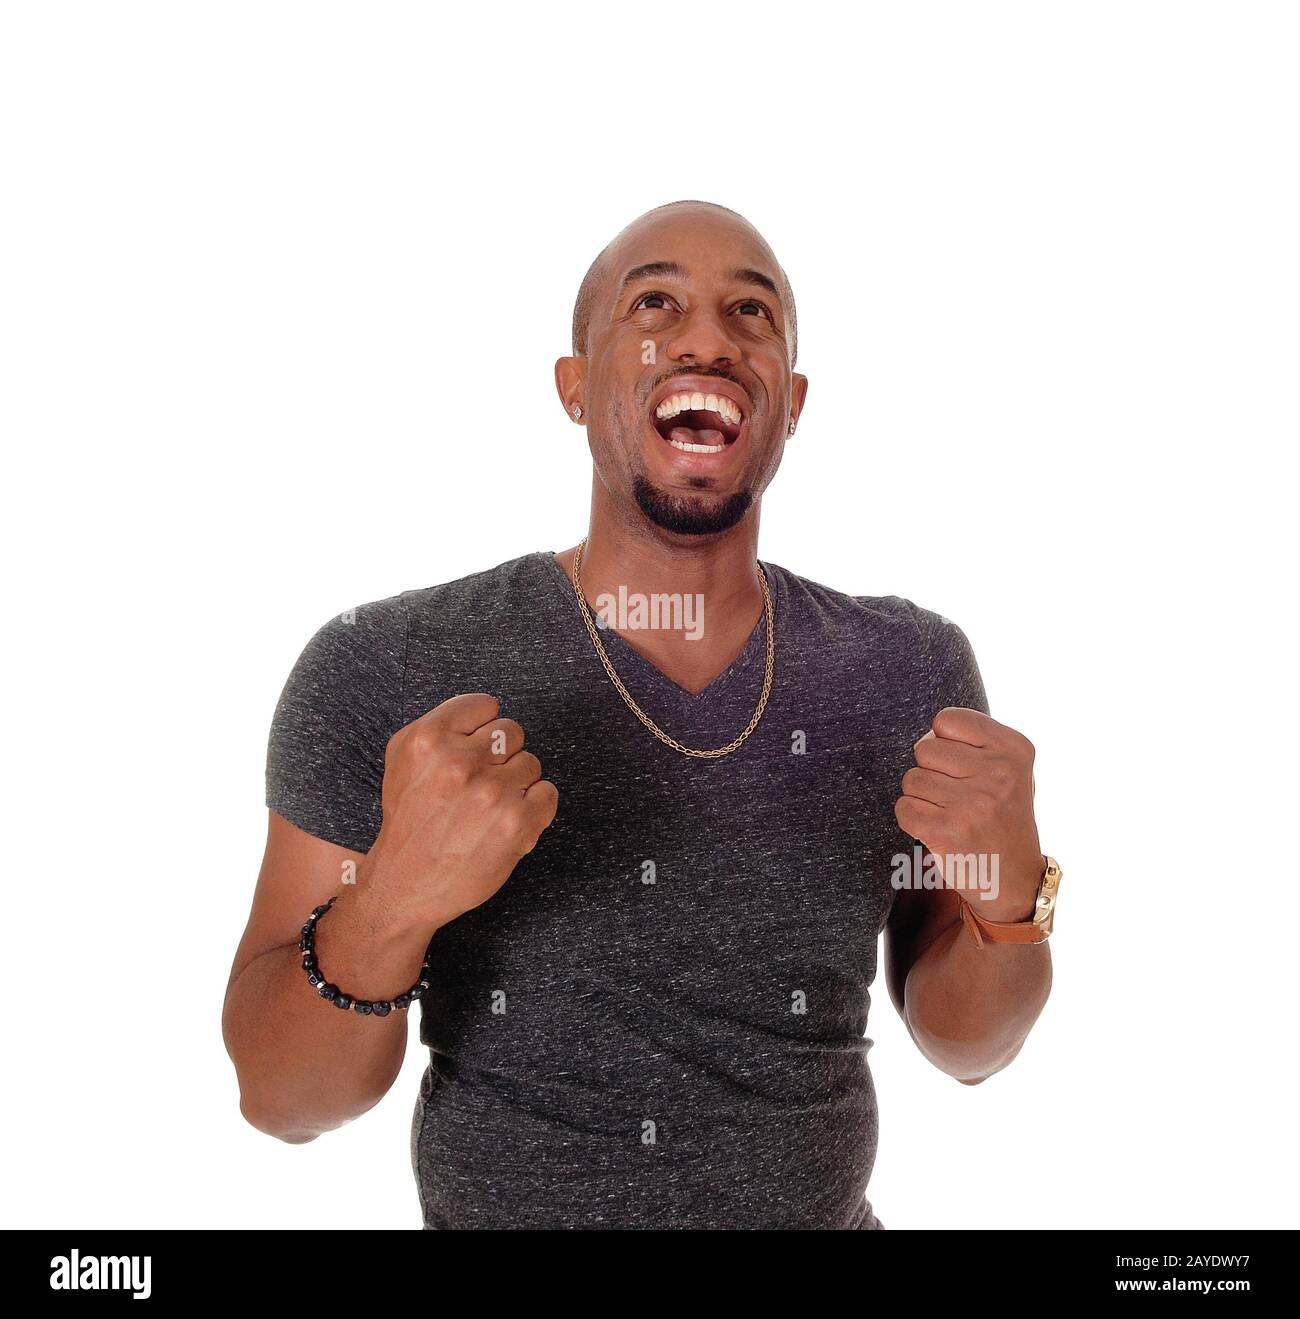 Happy laughing African American man with mouth open Stock Photo